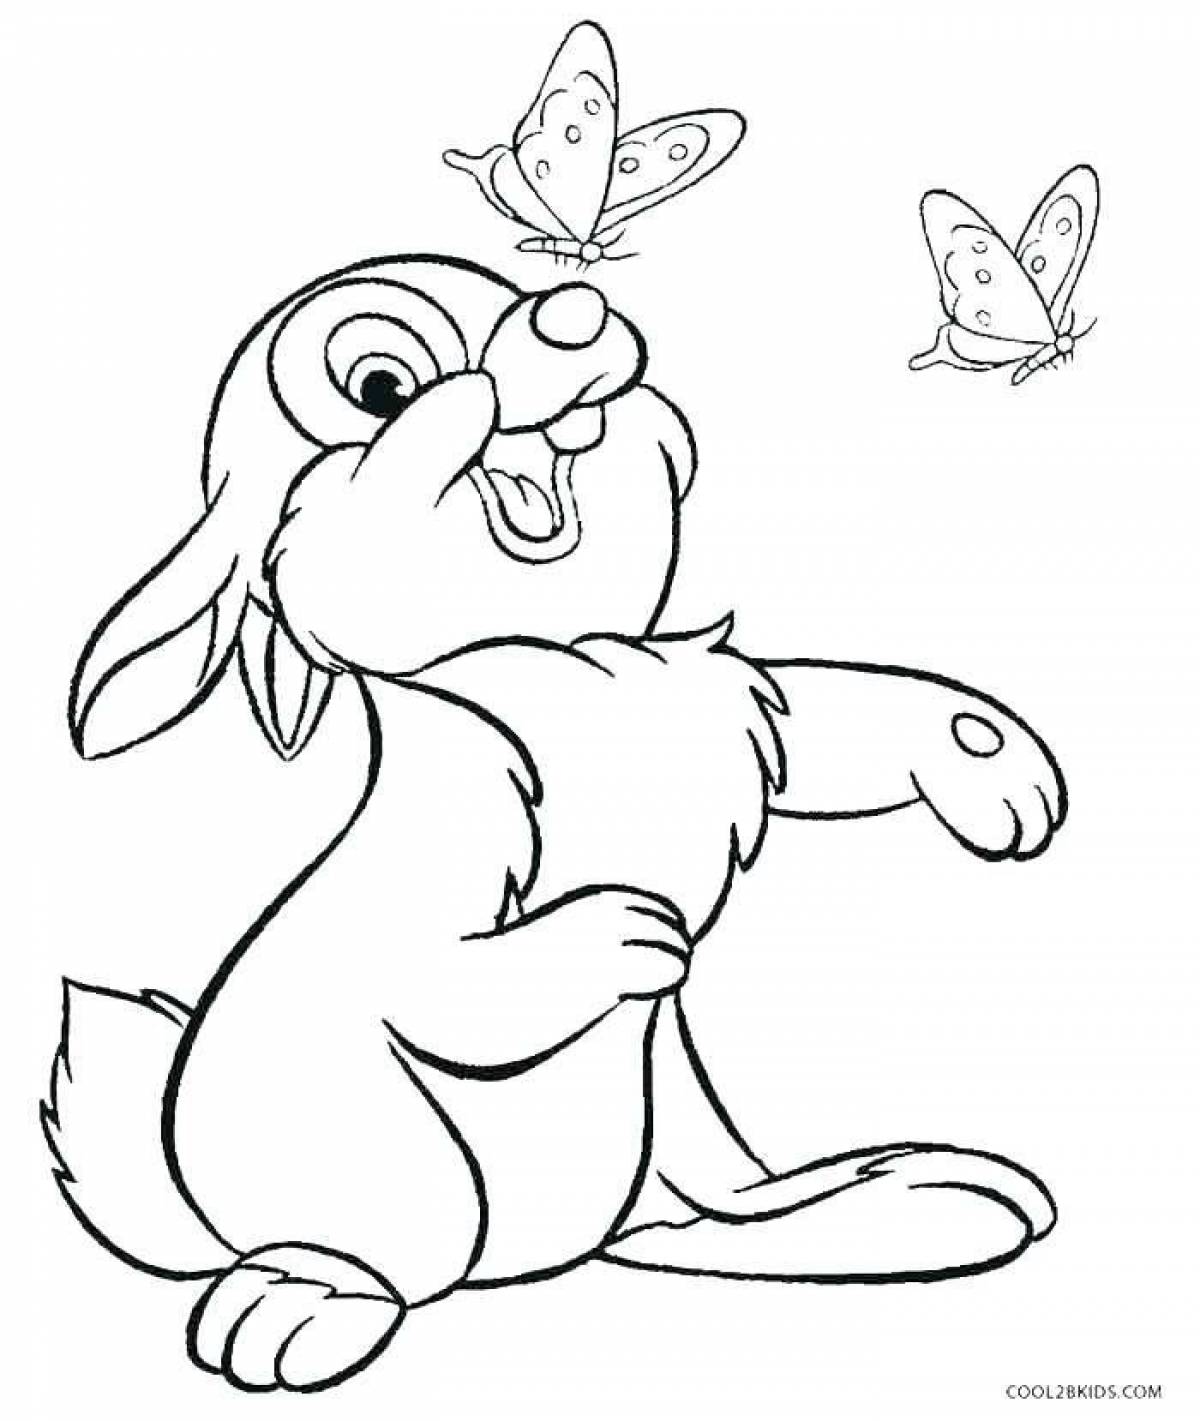 Bunny soft coloring page